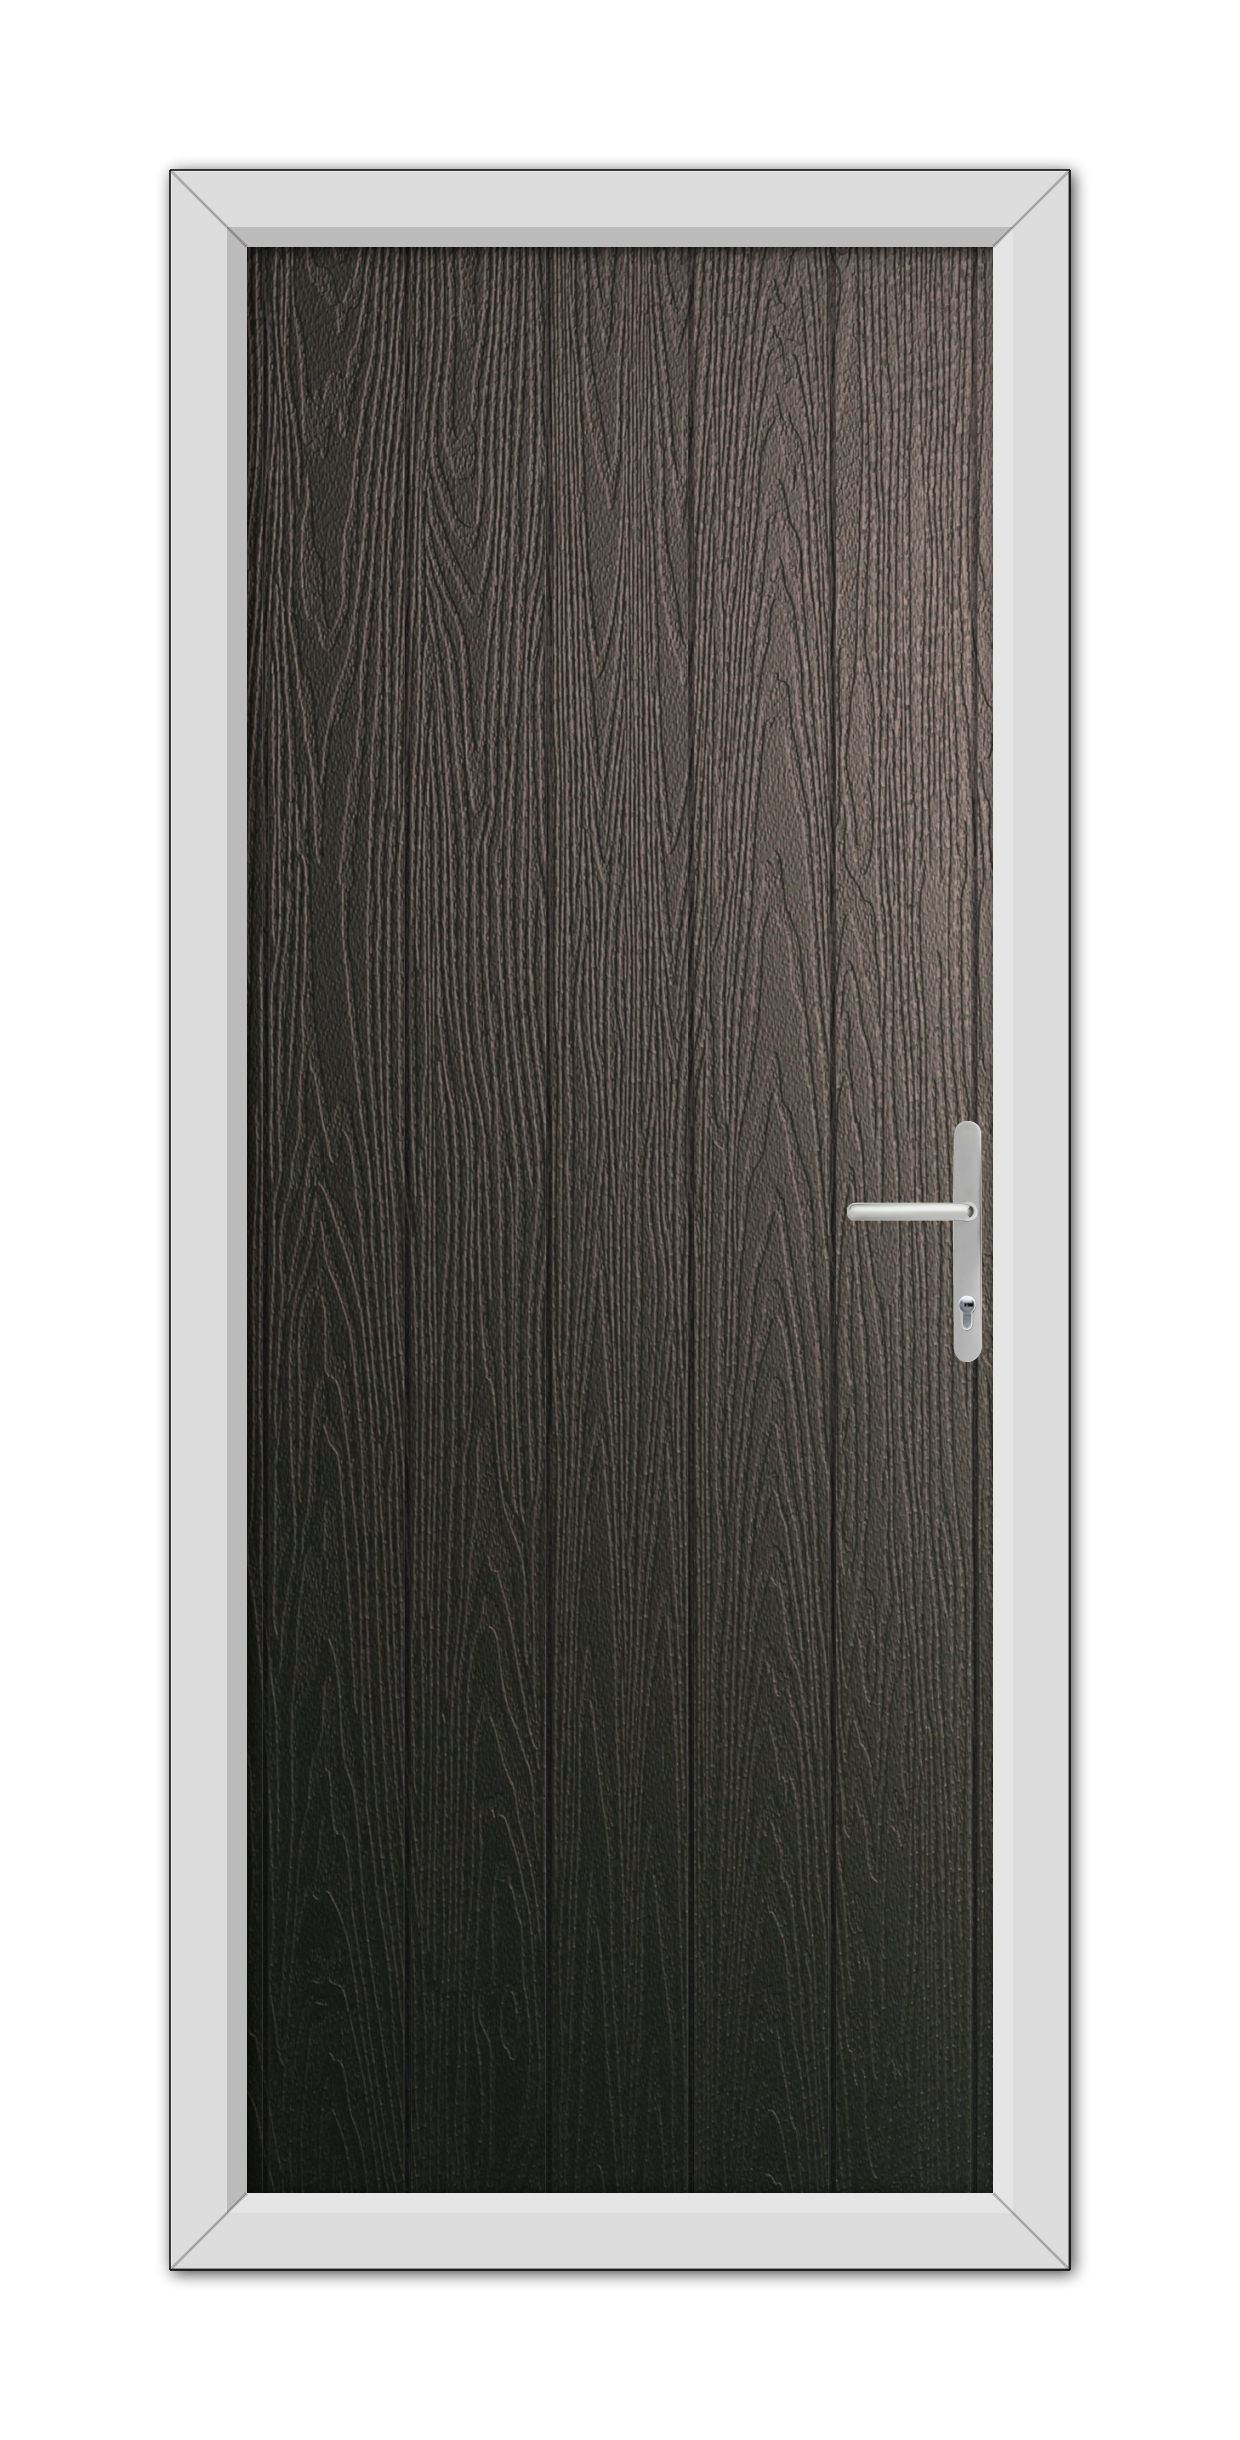 A modern Schwarzbraun Norfolk Solid Composite Door 48mm Timber Core with a textured wood design and a silver handle, set within a light gray frame, isolated on a white background.